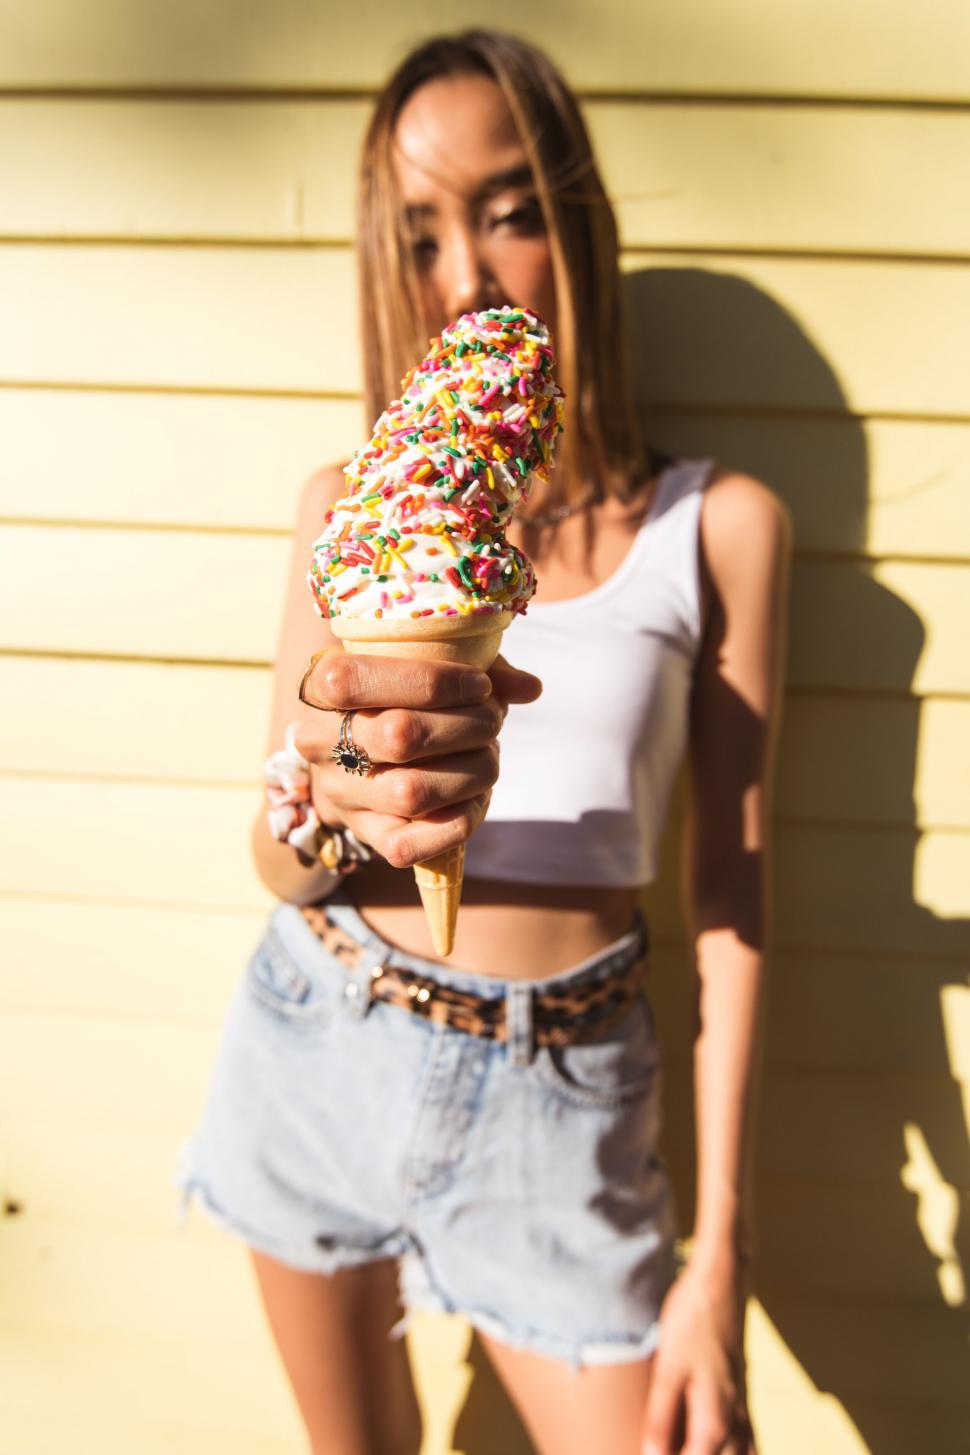 Free Image of Woman holding a colorful ice cream cone 